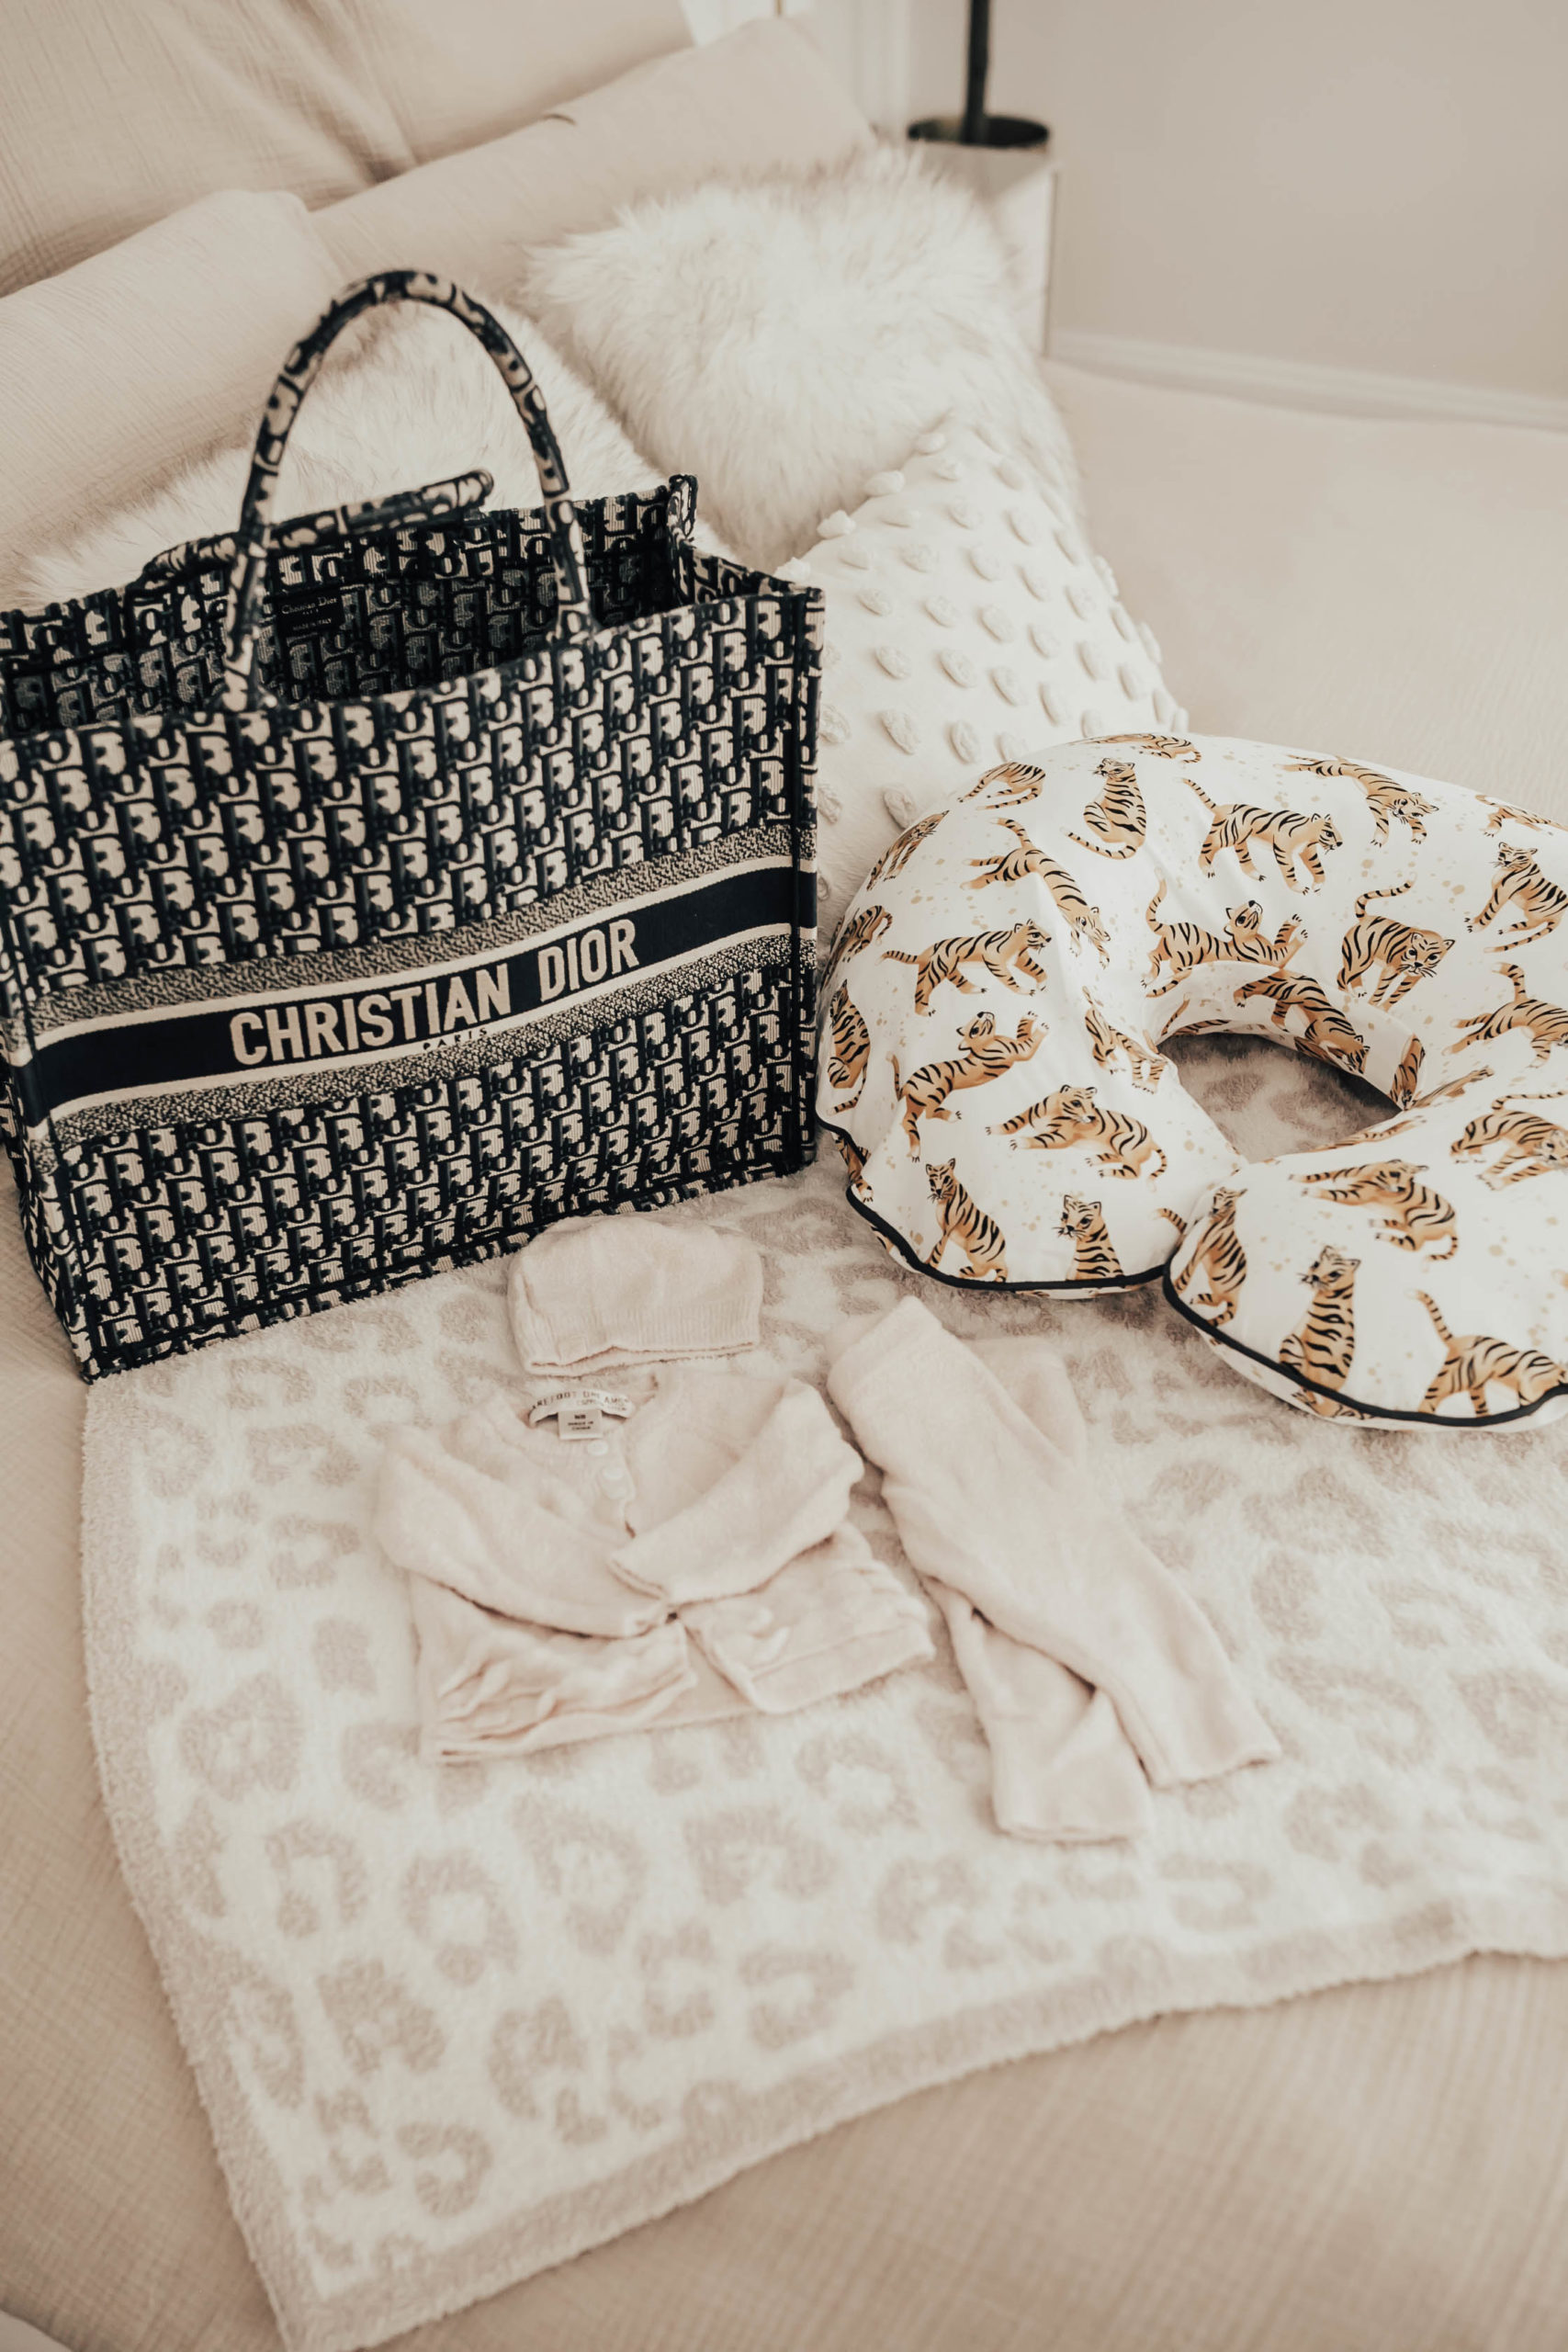 Reno blogger, Ashley Zeal Hurd, from The Ashley and Emily blog shares what she's packing in her c-section hospital bag. 